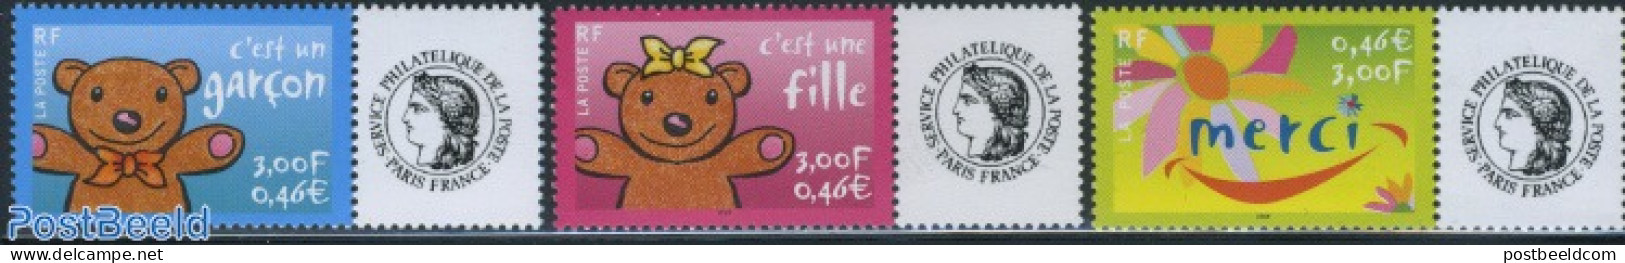 France 2001 Greeting Stamps With Personal Tabs 3v (tabs May Vary), Mint NH, Various - Greetings & Wishing Stamps - Neufs